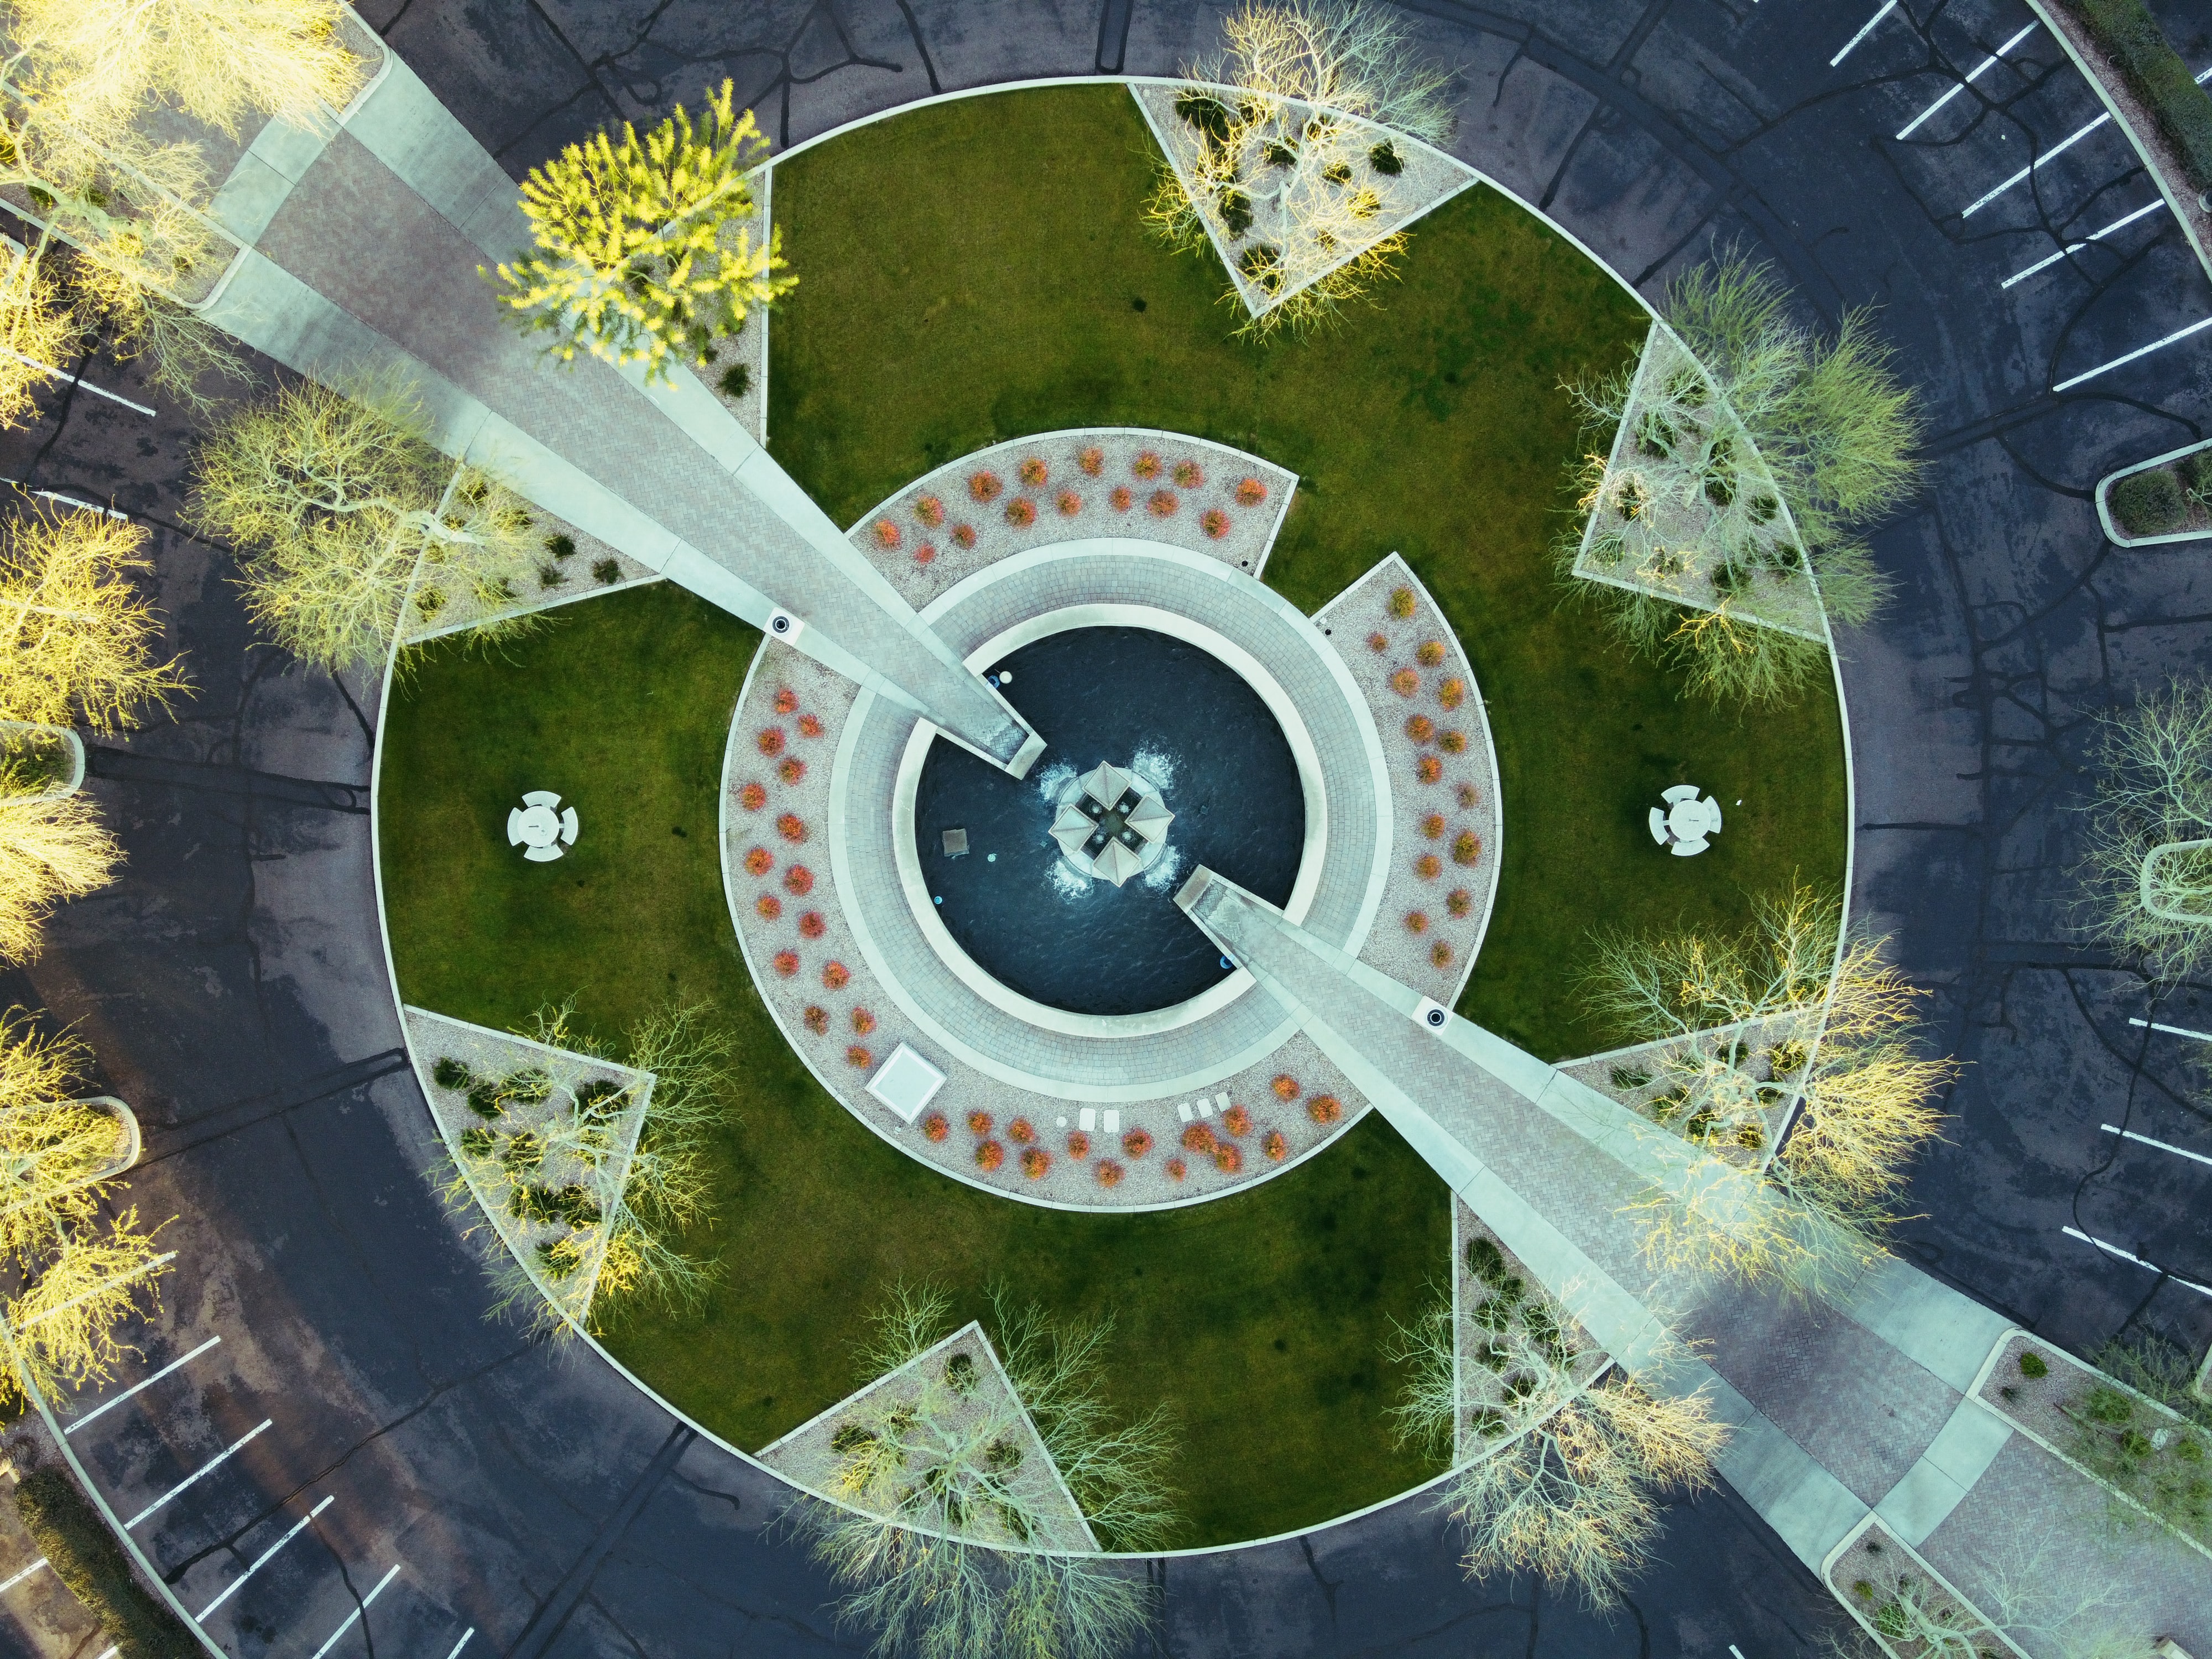 Aerial photo of a circular park surrounded by pavement